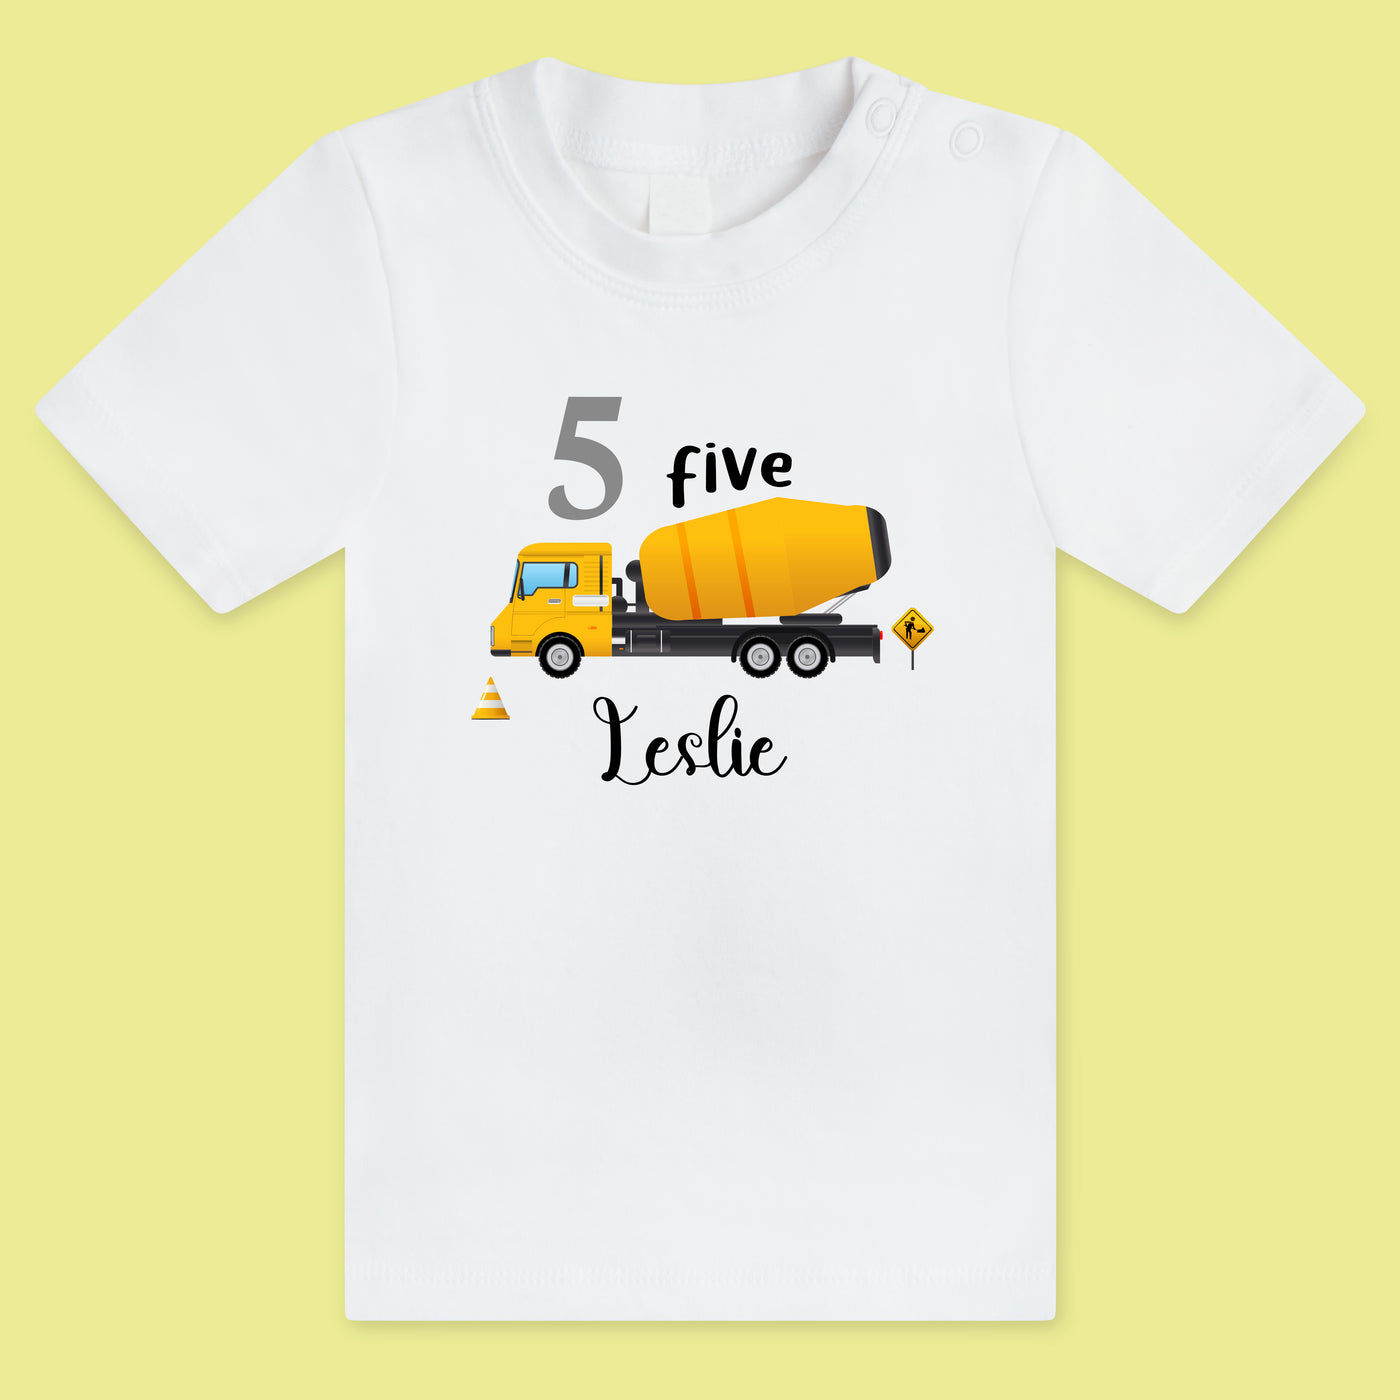 KID'S BIRTHDAY DIGIT T-SHIRT WITH VEHICLE STYLE 5